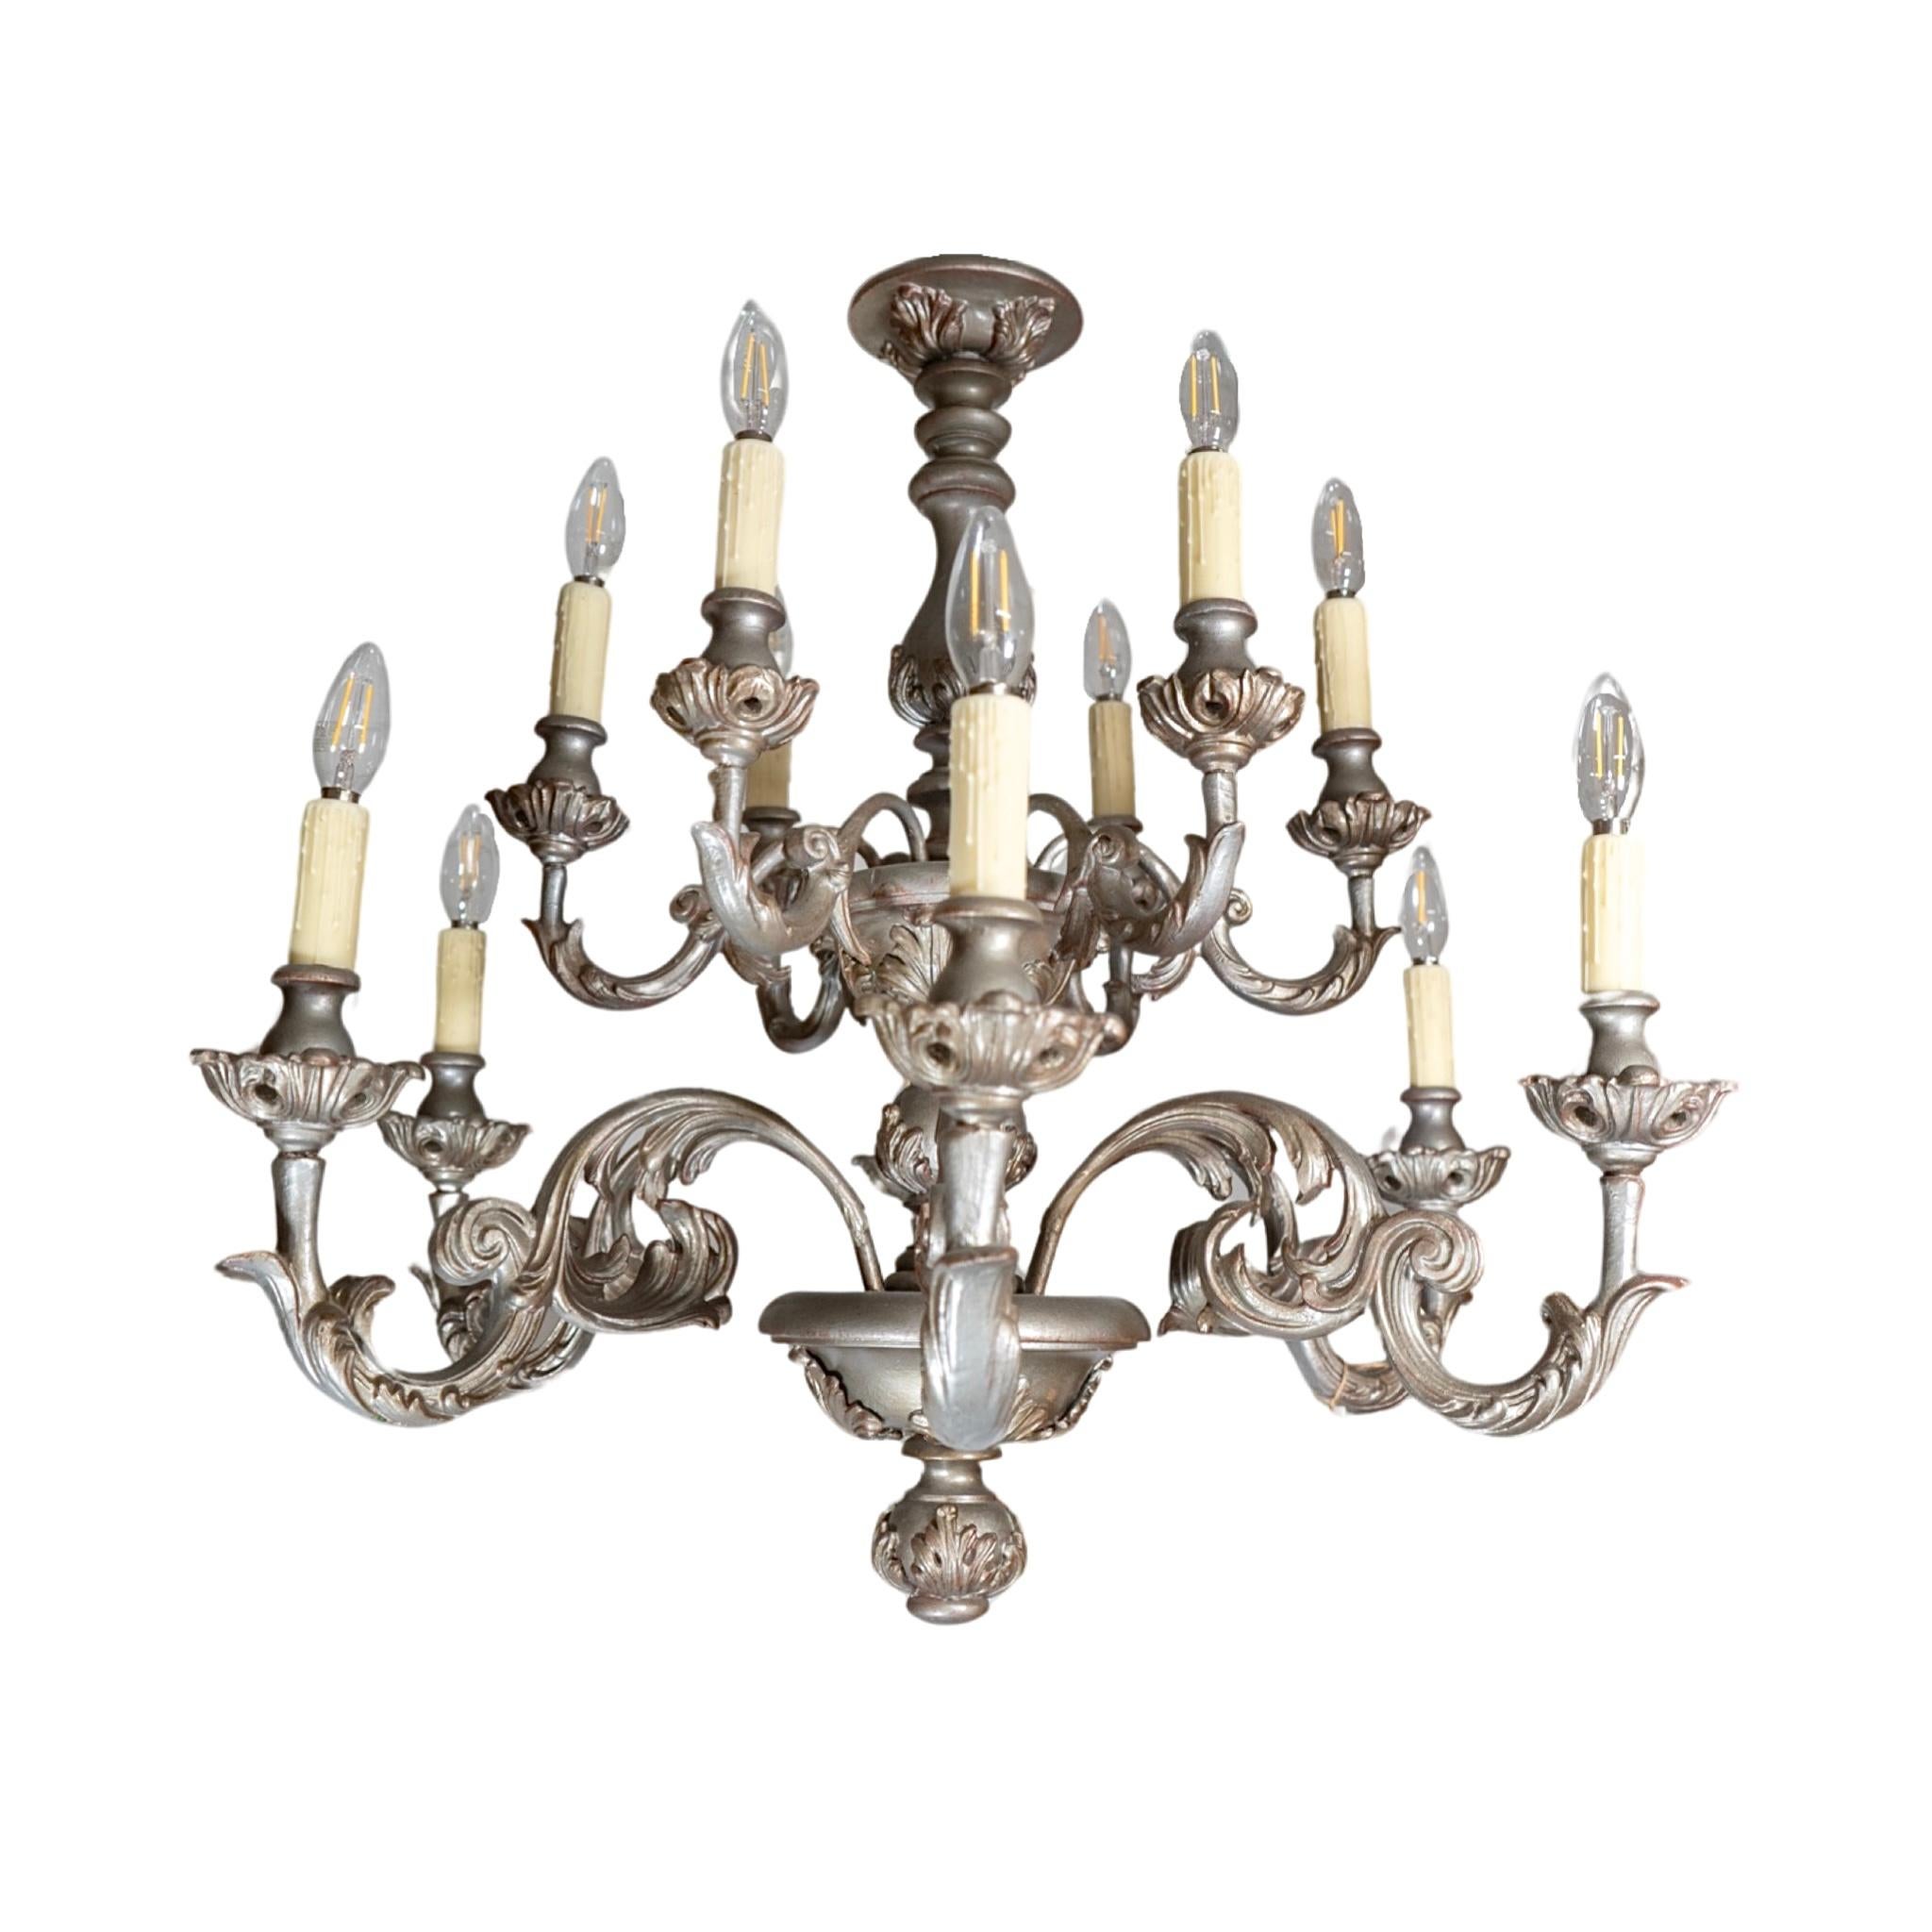 Crafted from French Oak wood in the 1970s, this chandelier boasts a timeless elegance with its silver leaf finish. Expertly wired and ready for installation, it brings a touch of luxury to any space. Elevate your décor with this unique and rare find.